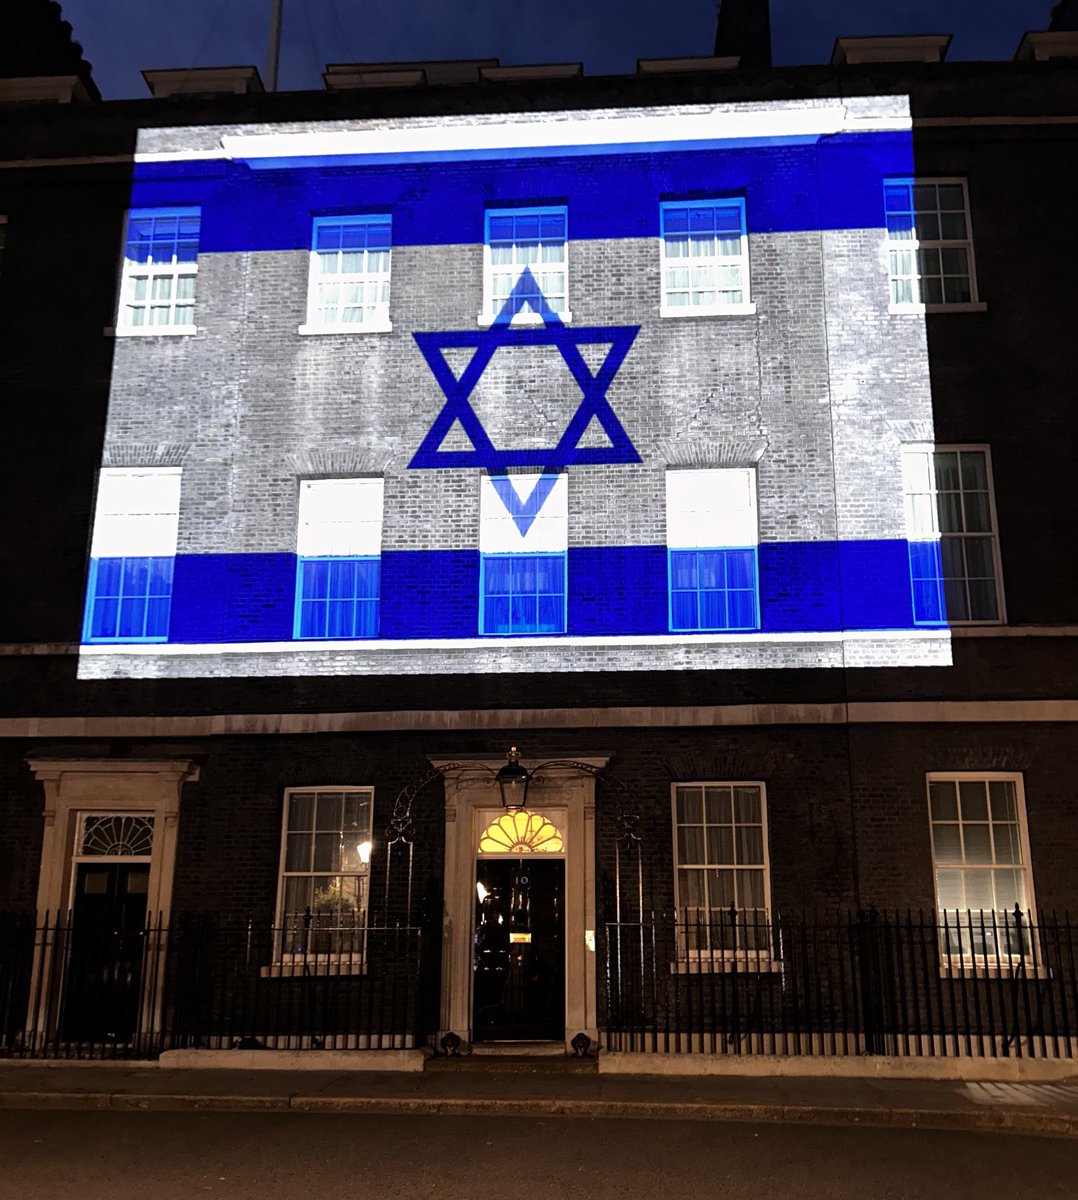 The Prime Minister Rishi Sunak has illuminated Downing Street with the Israeli flag in a show of solidarity with Israel.